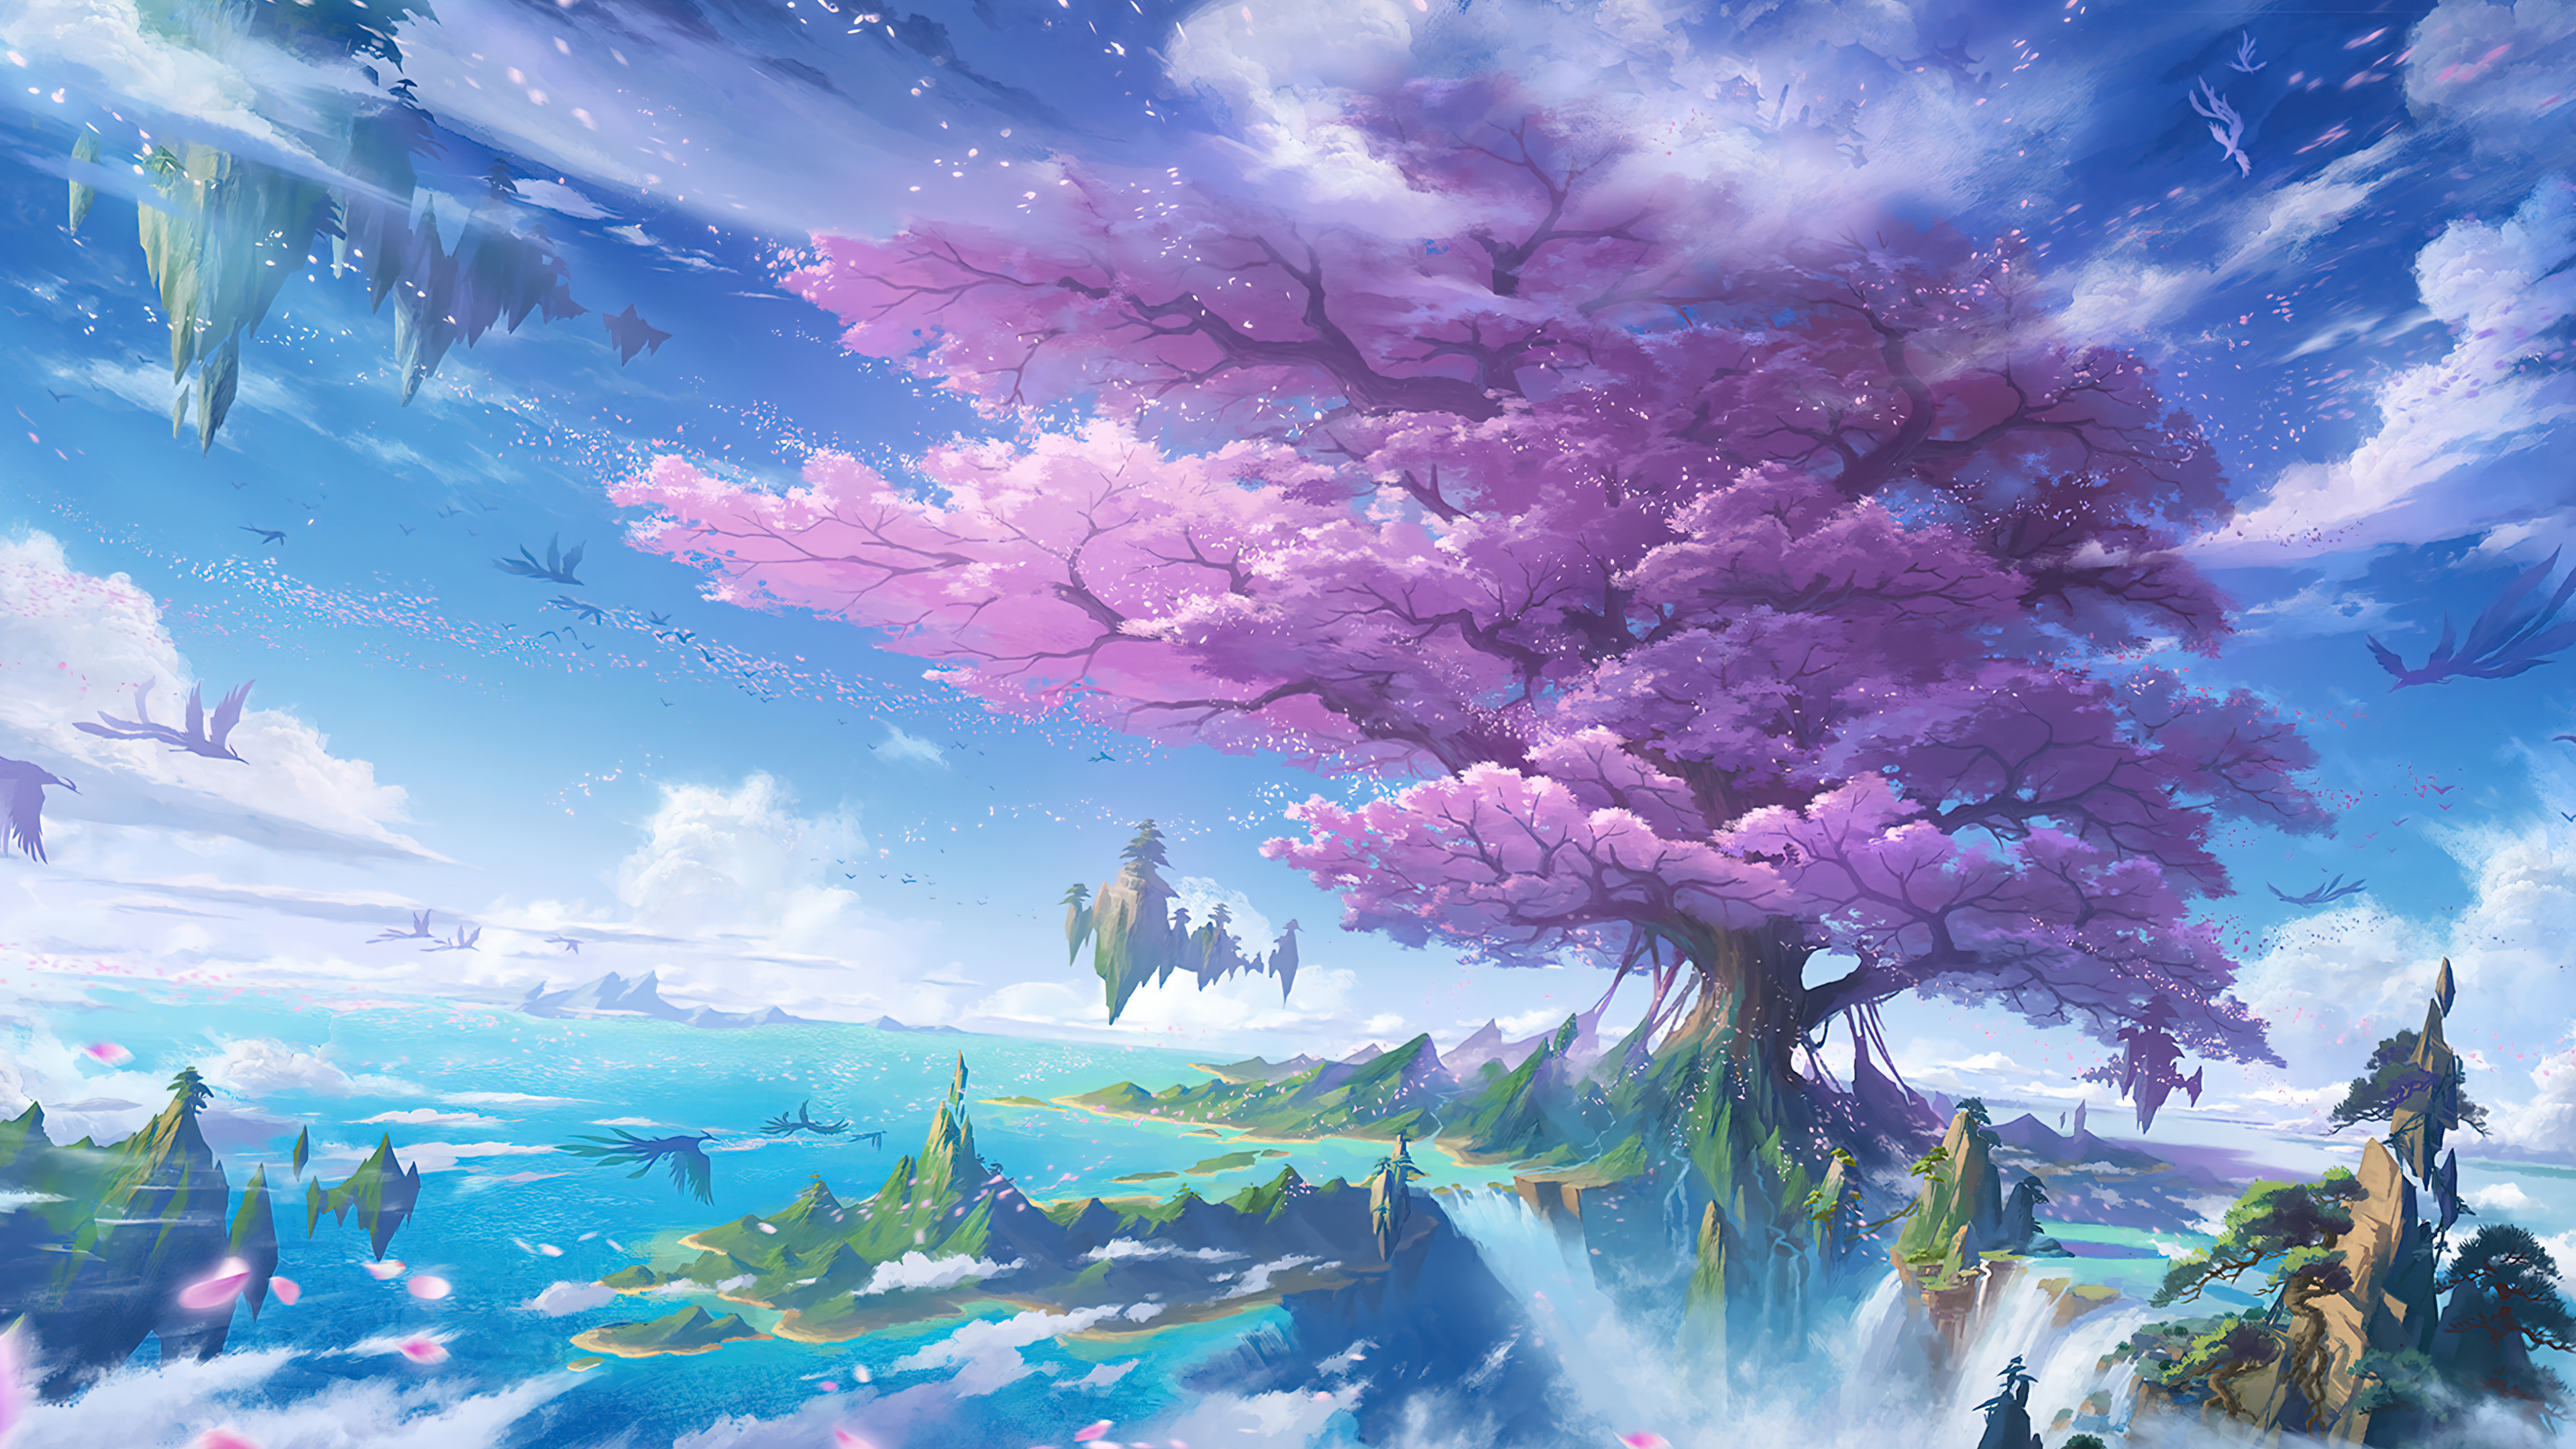 General 3840x2160 fantasy art mountains nature clouds floating island